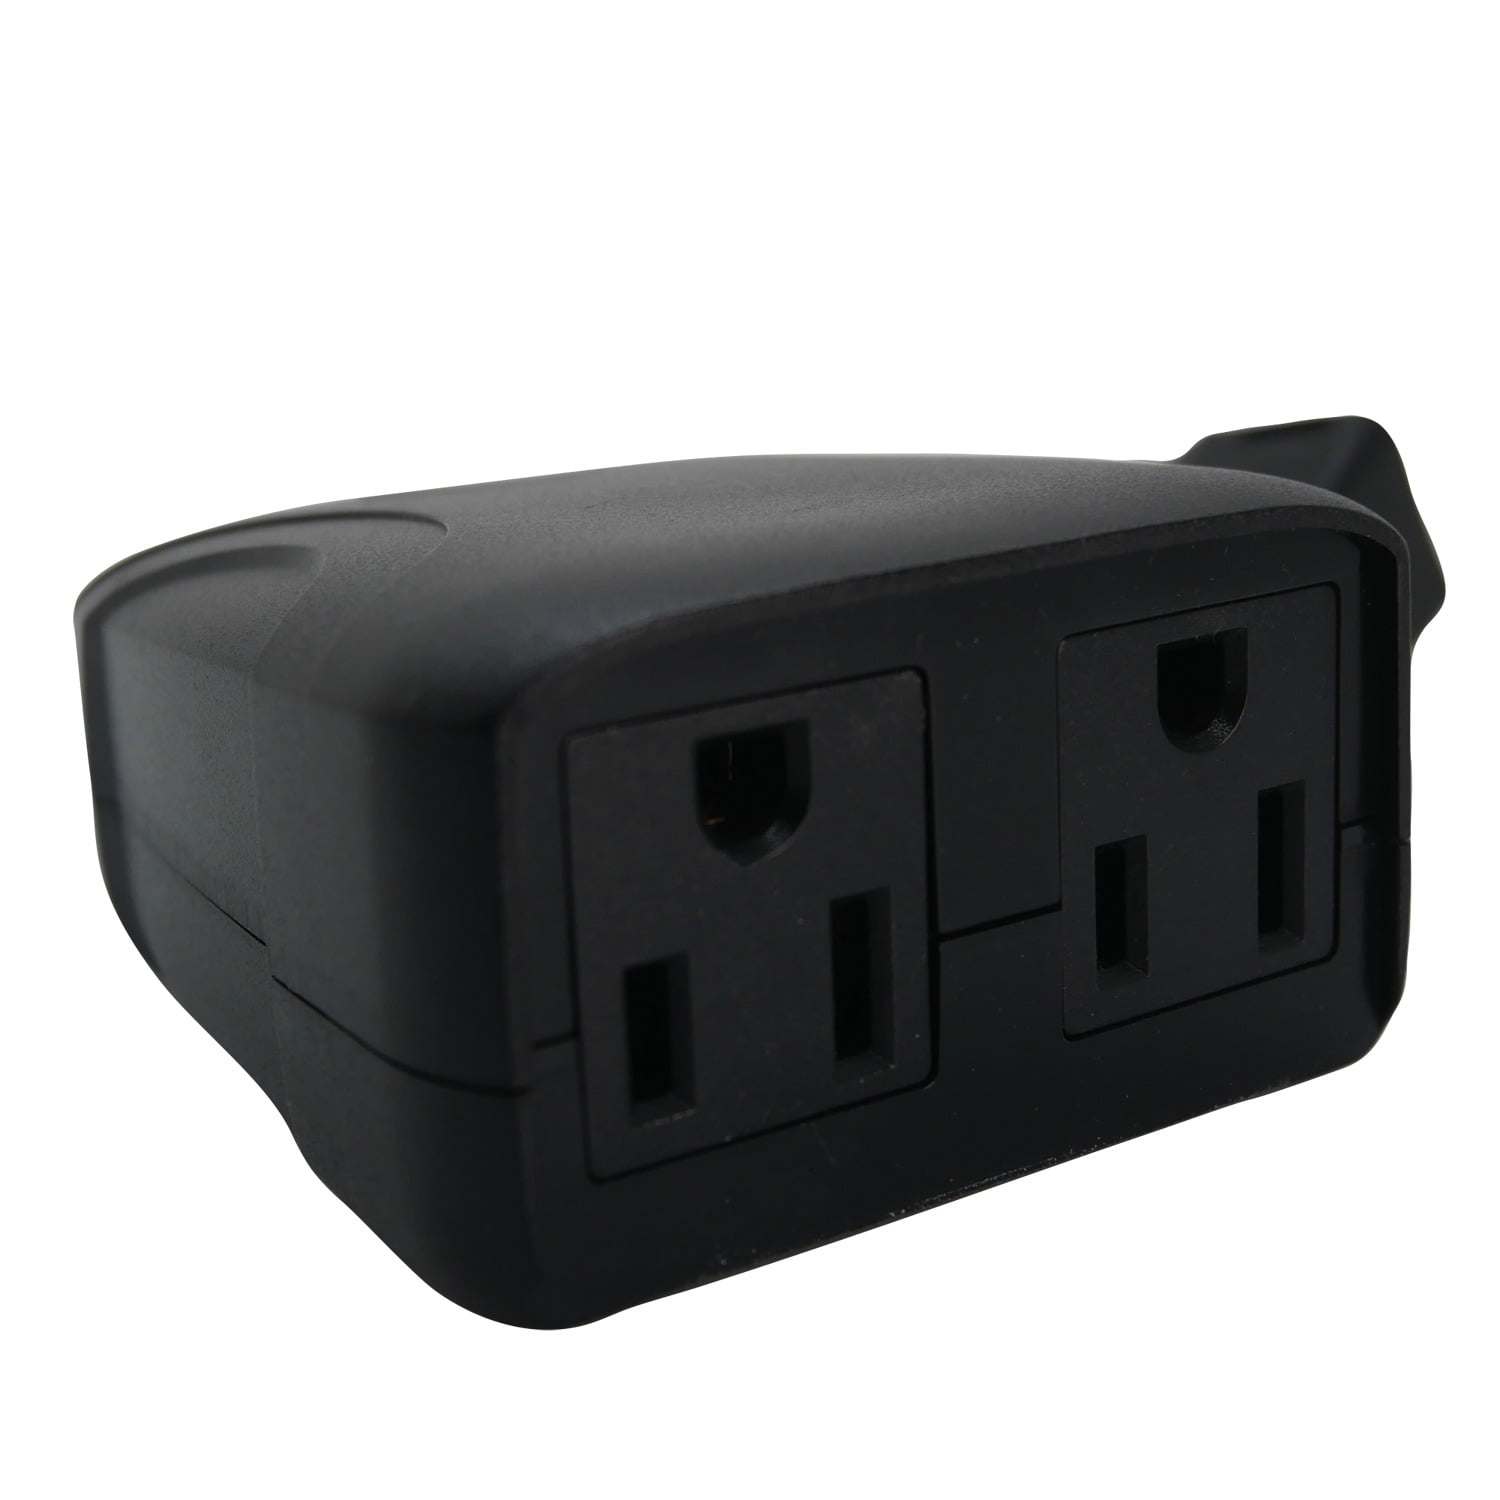 Swidget 20A Outlet - Smart Plug Power Outlet Switch for Automation -  Requires Neutral Wire - Compatible with Swidget Smart Inserts for Remote  Control